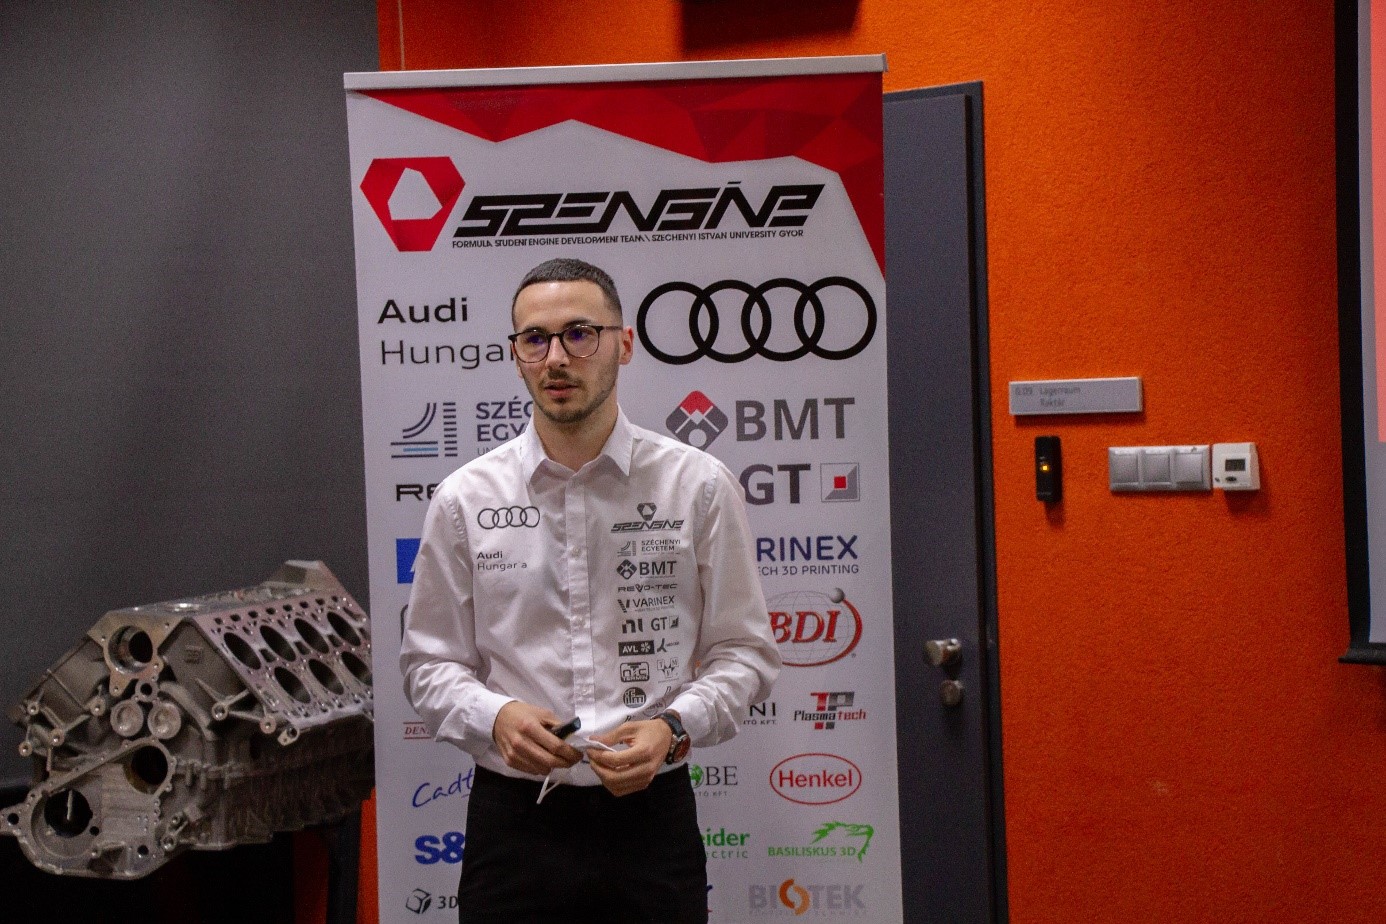 It was Maximilian Deák’s job to share the technical details with the audience. 